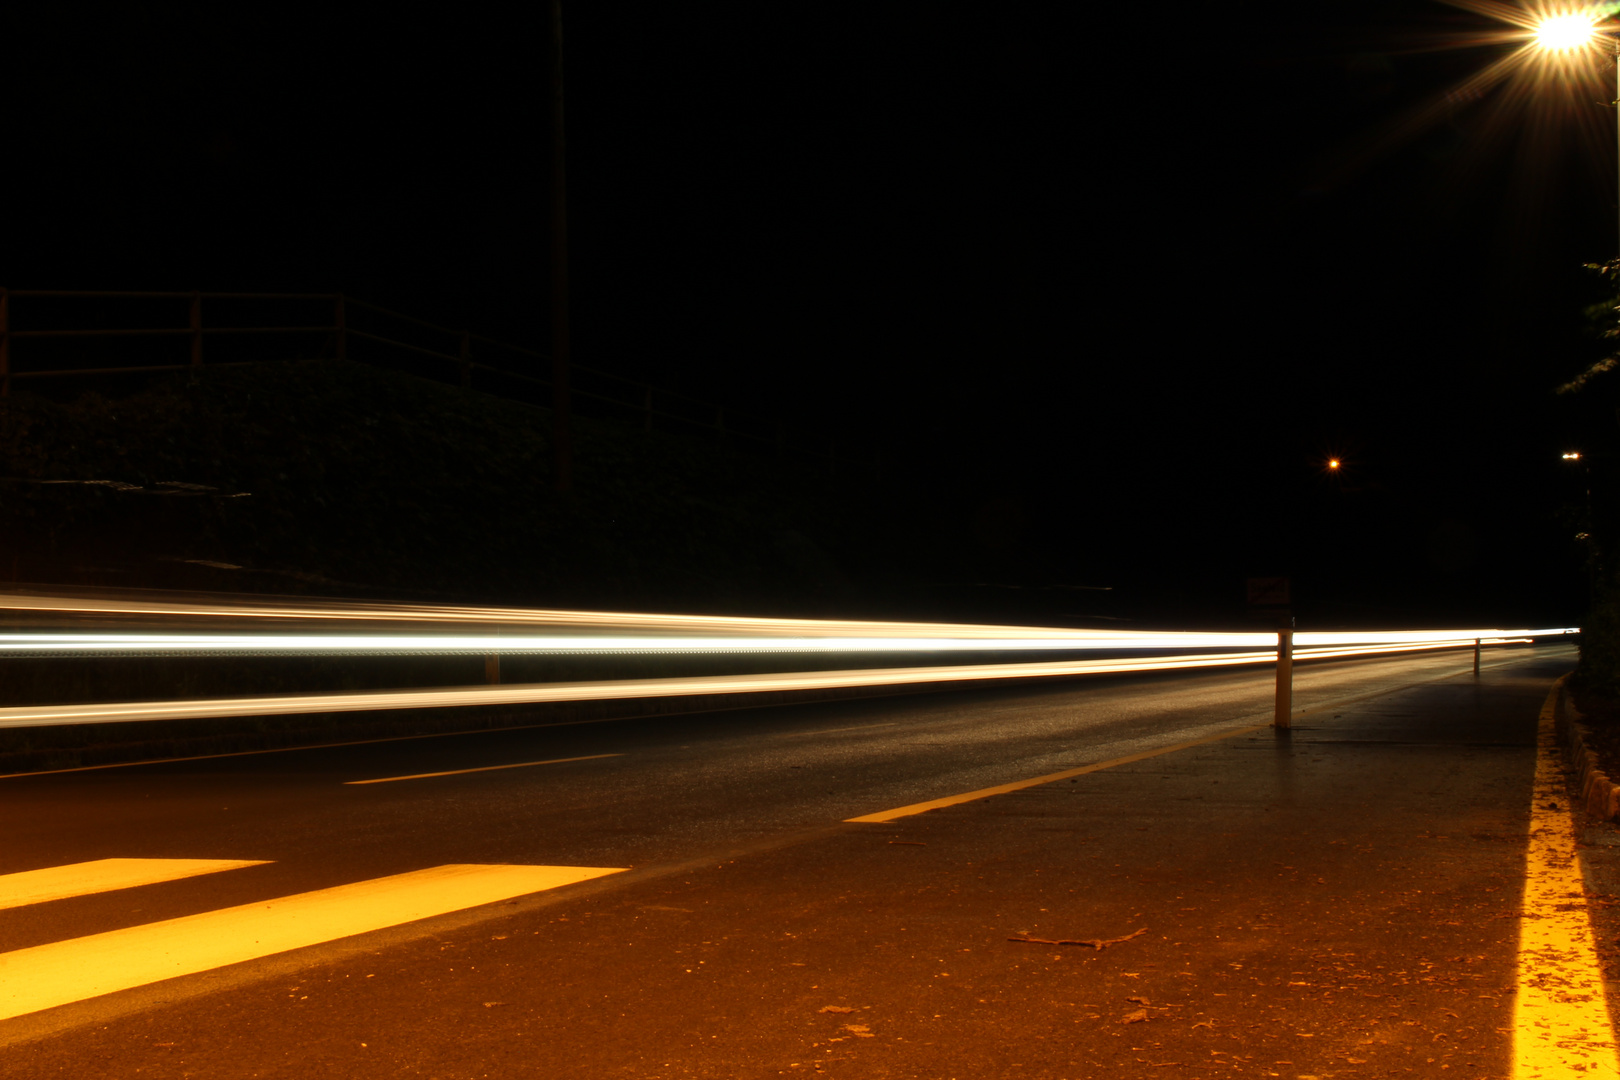 Long time exposure 